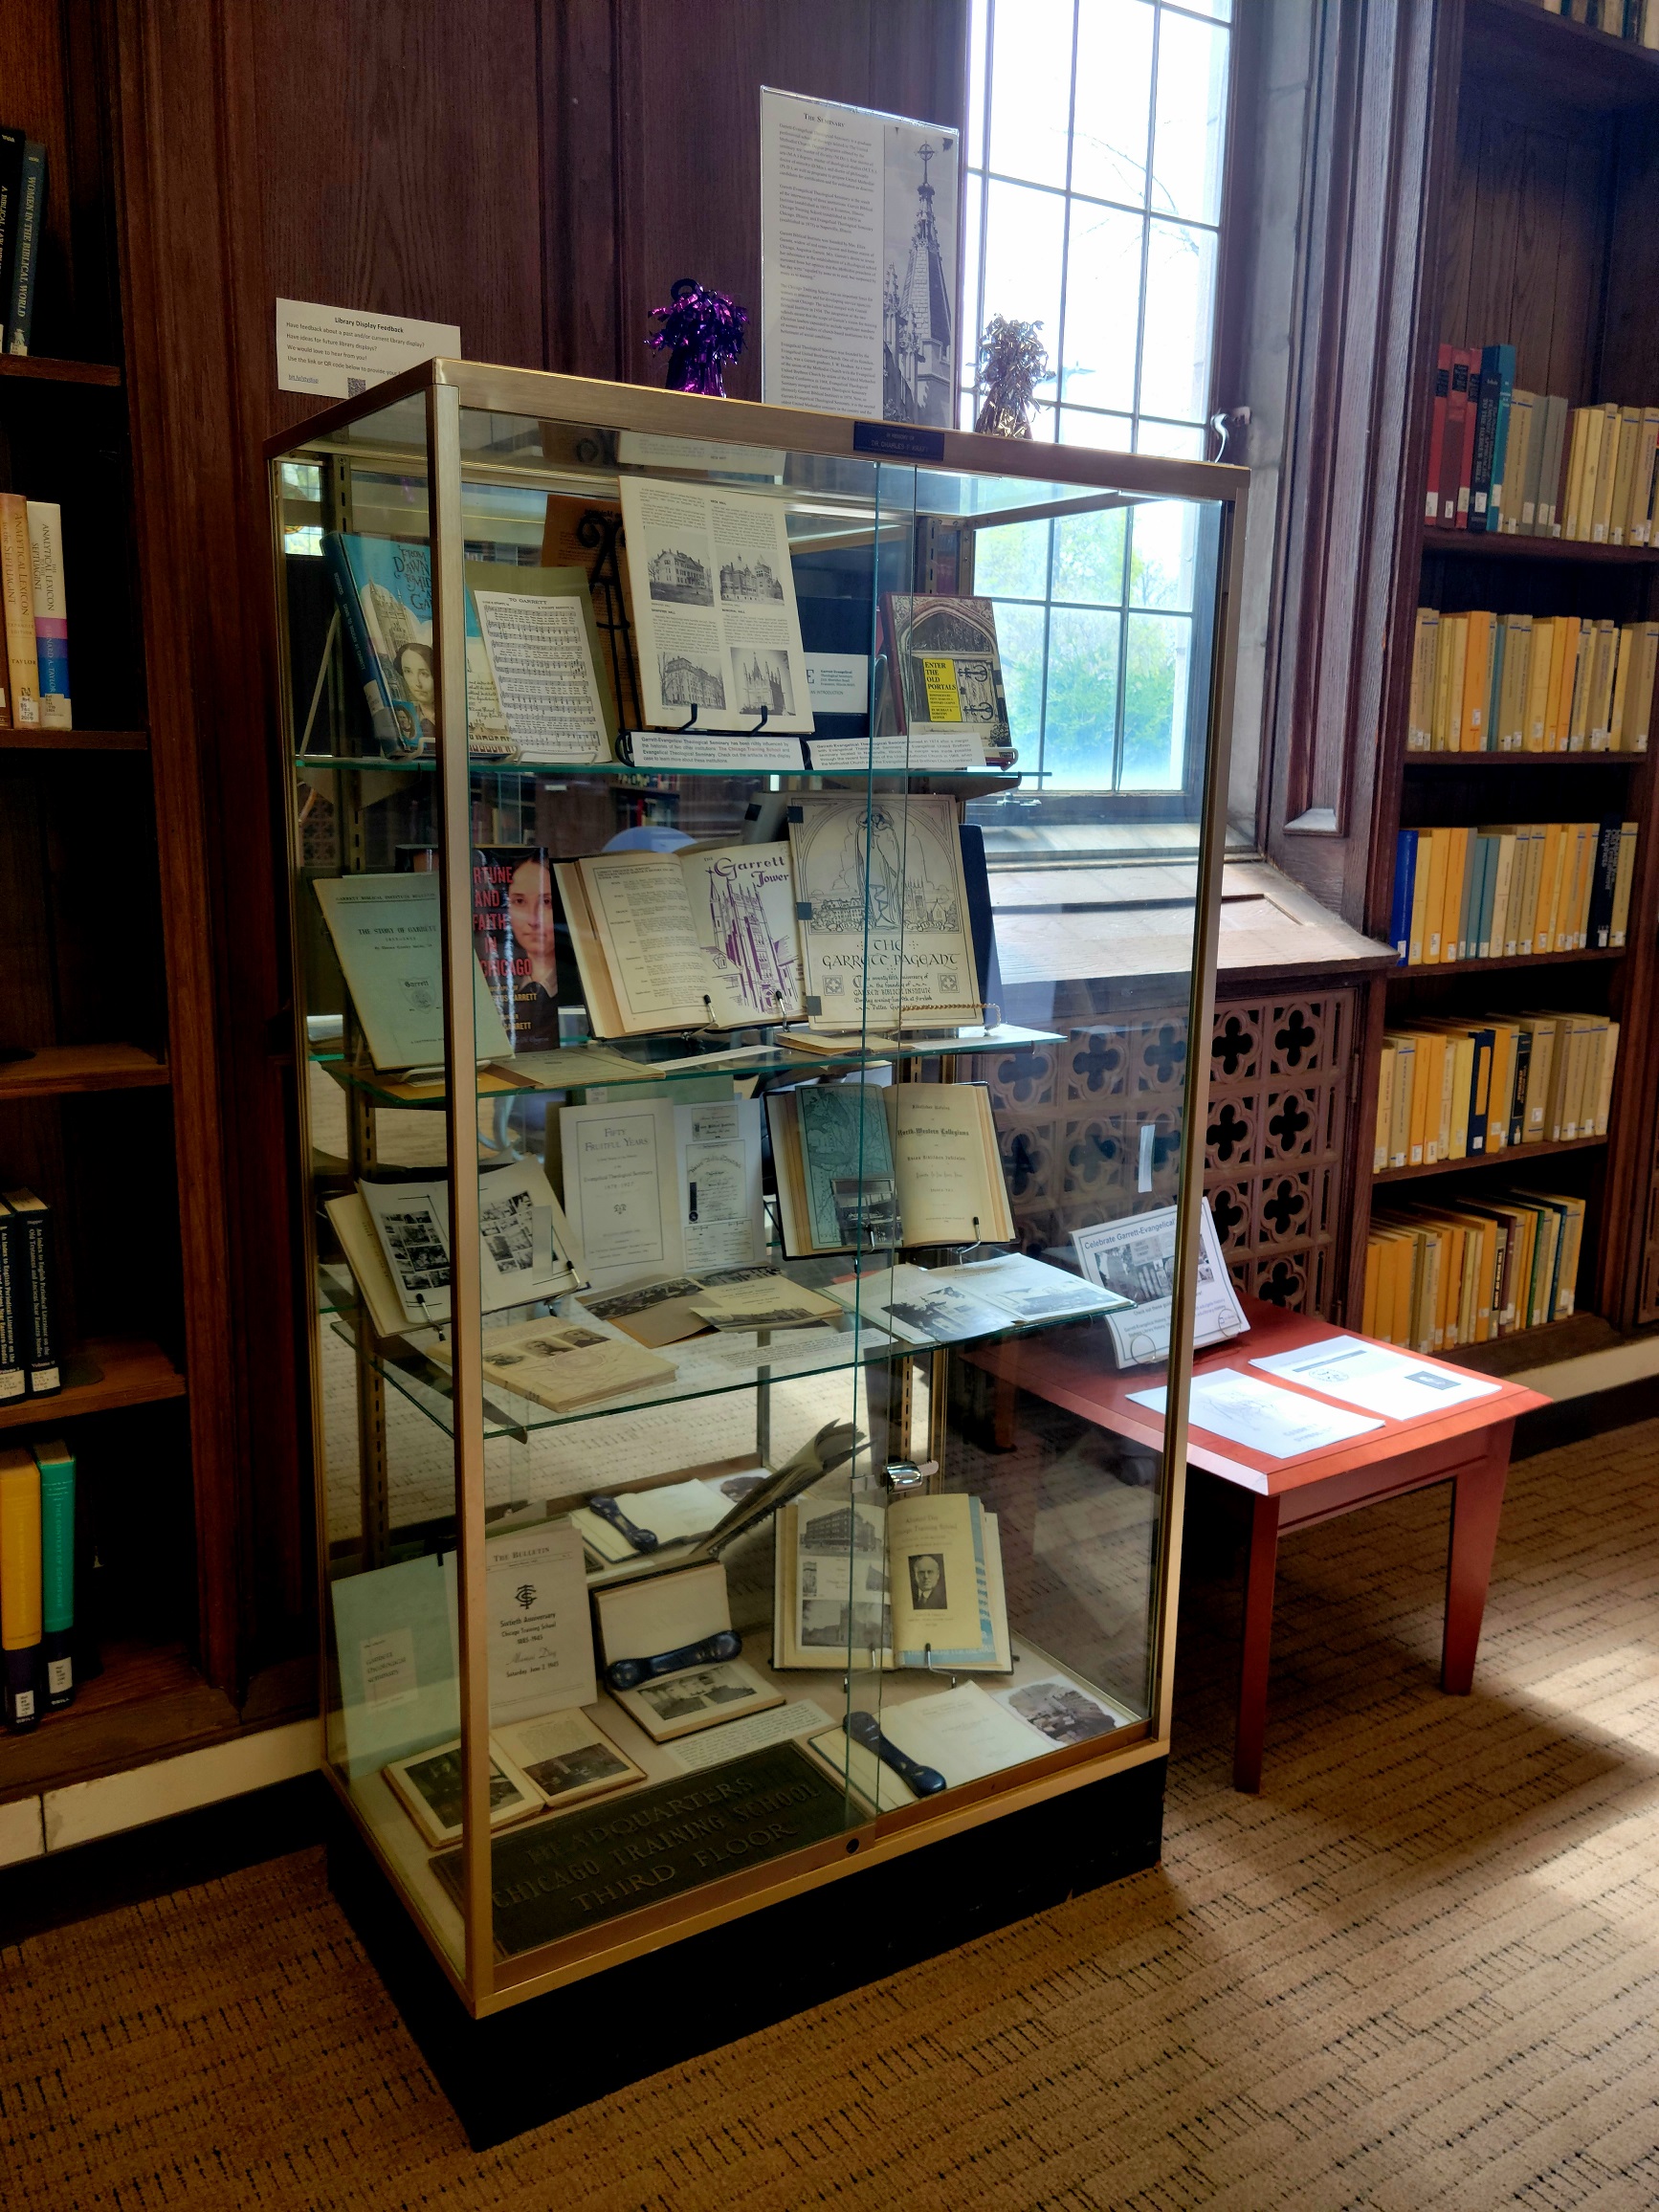 Garrett-Evangelical History Display with Information about The Chicago Training School, Evangelical Theological Seminary, and Garrett Biblical Institute